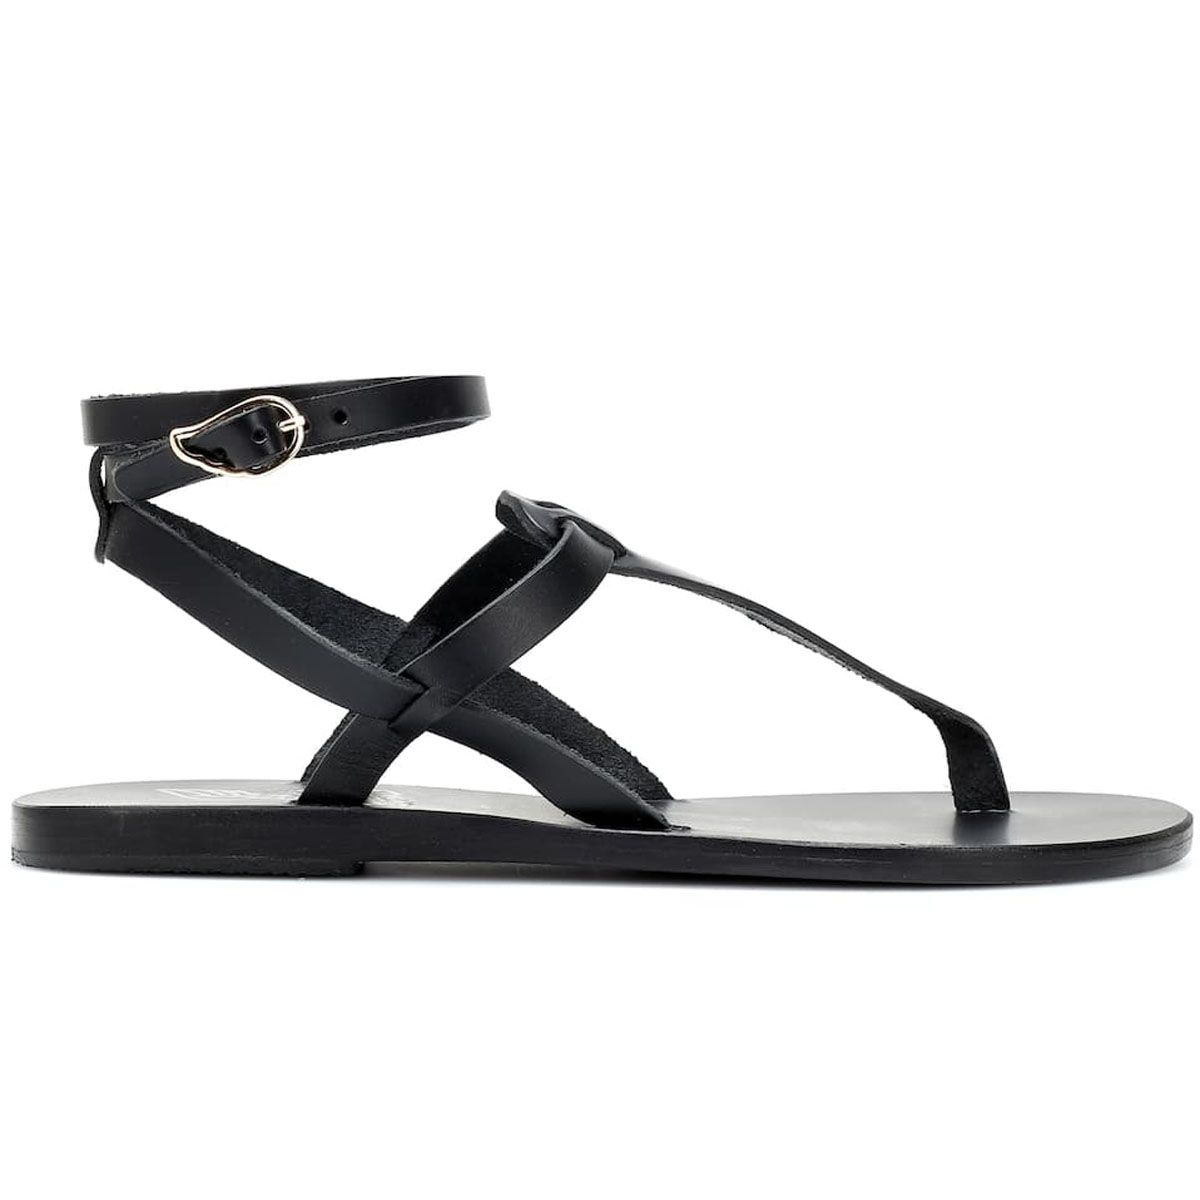 These Will Be the 6 Biggest Sandal Trends of 2020 | Who What Wear